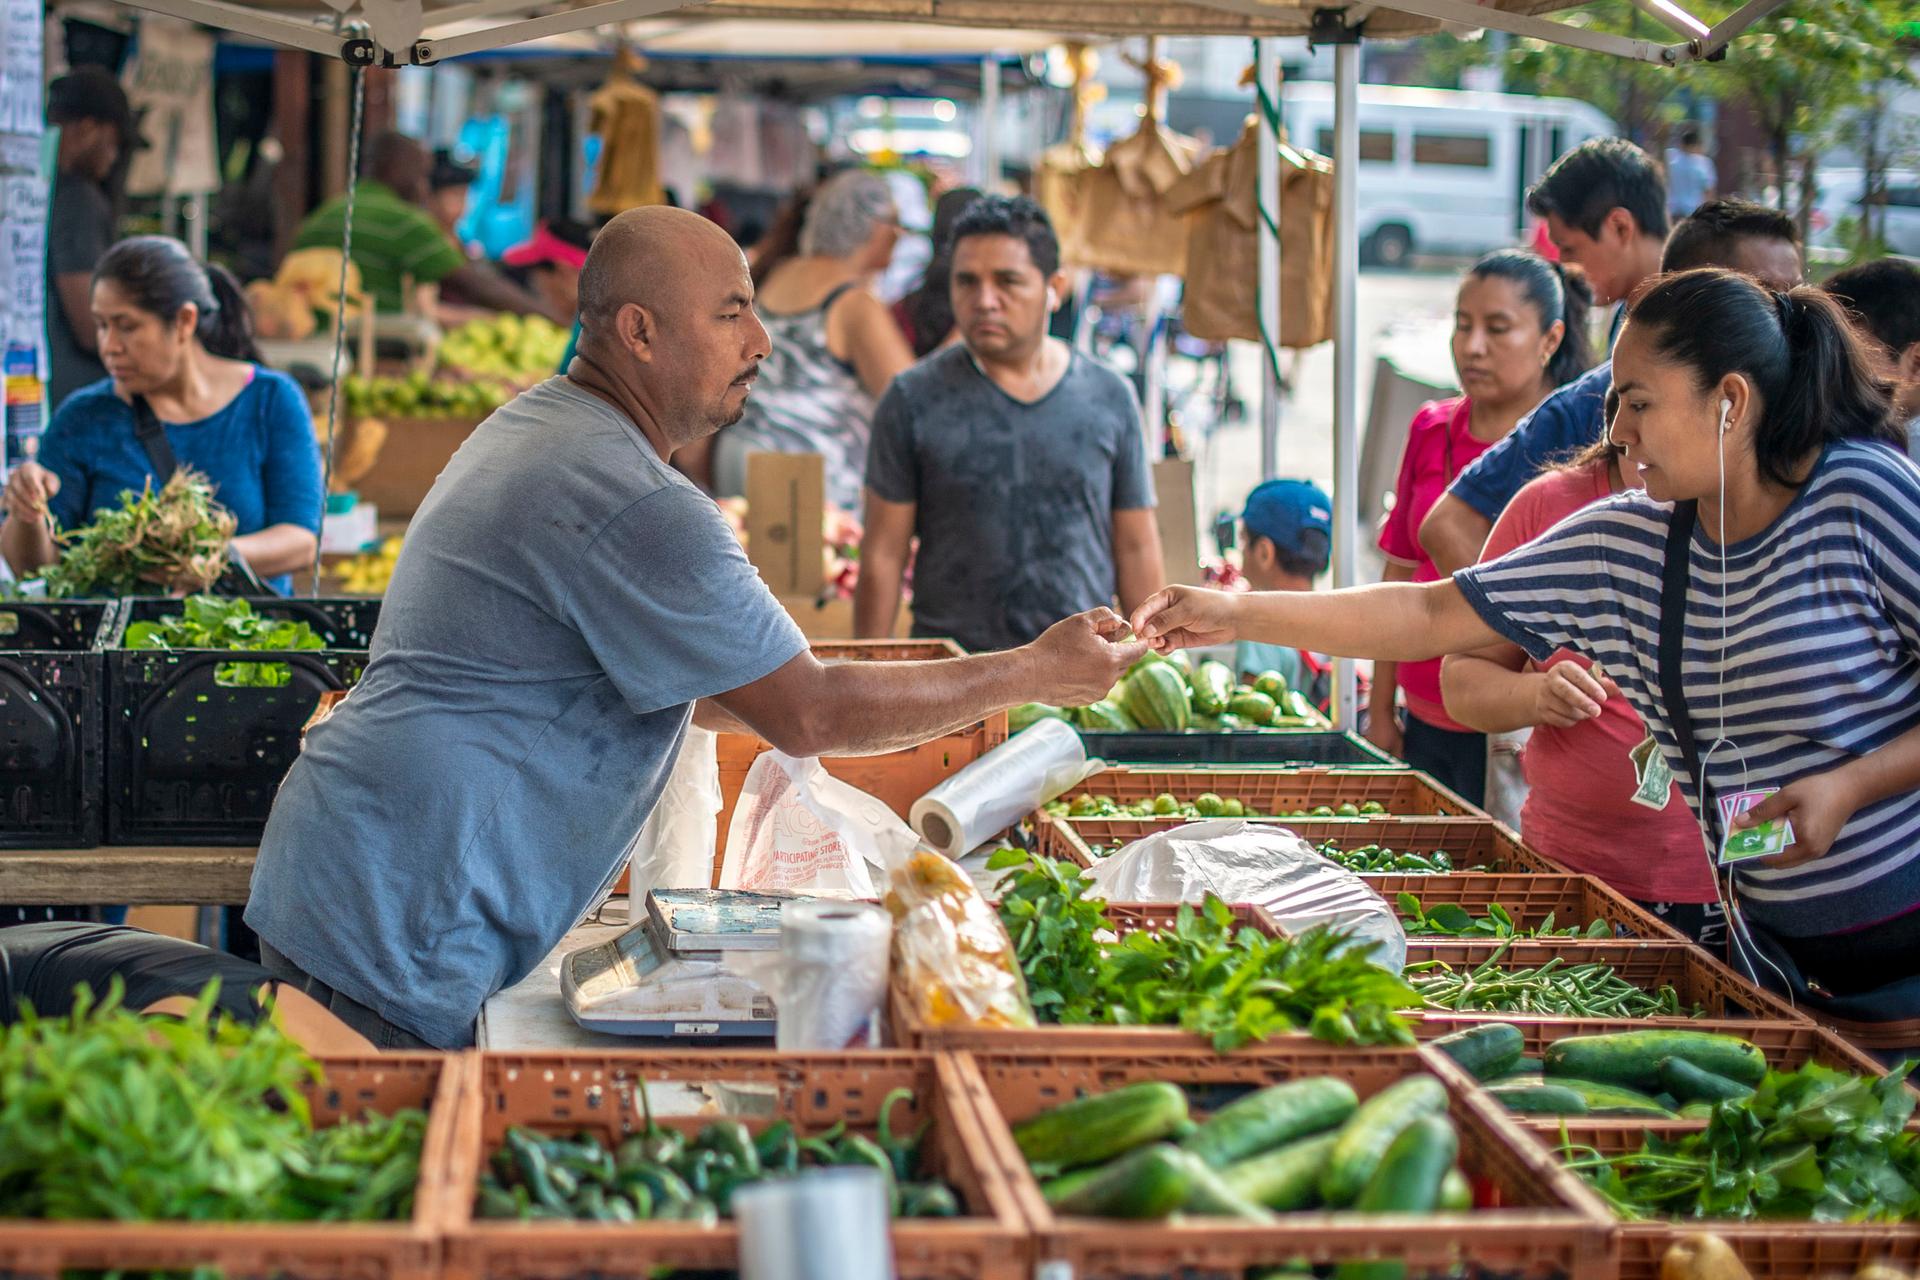 People buying fruits and vegetables at Corona Farmers Market